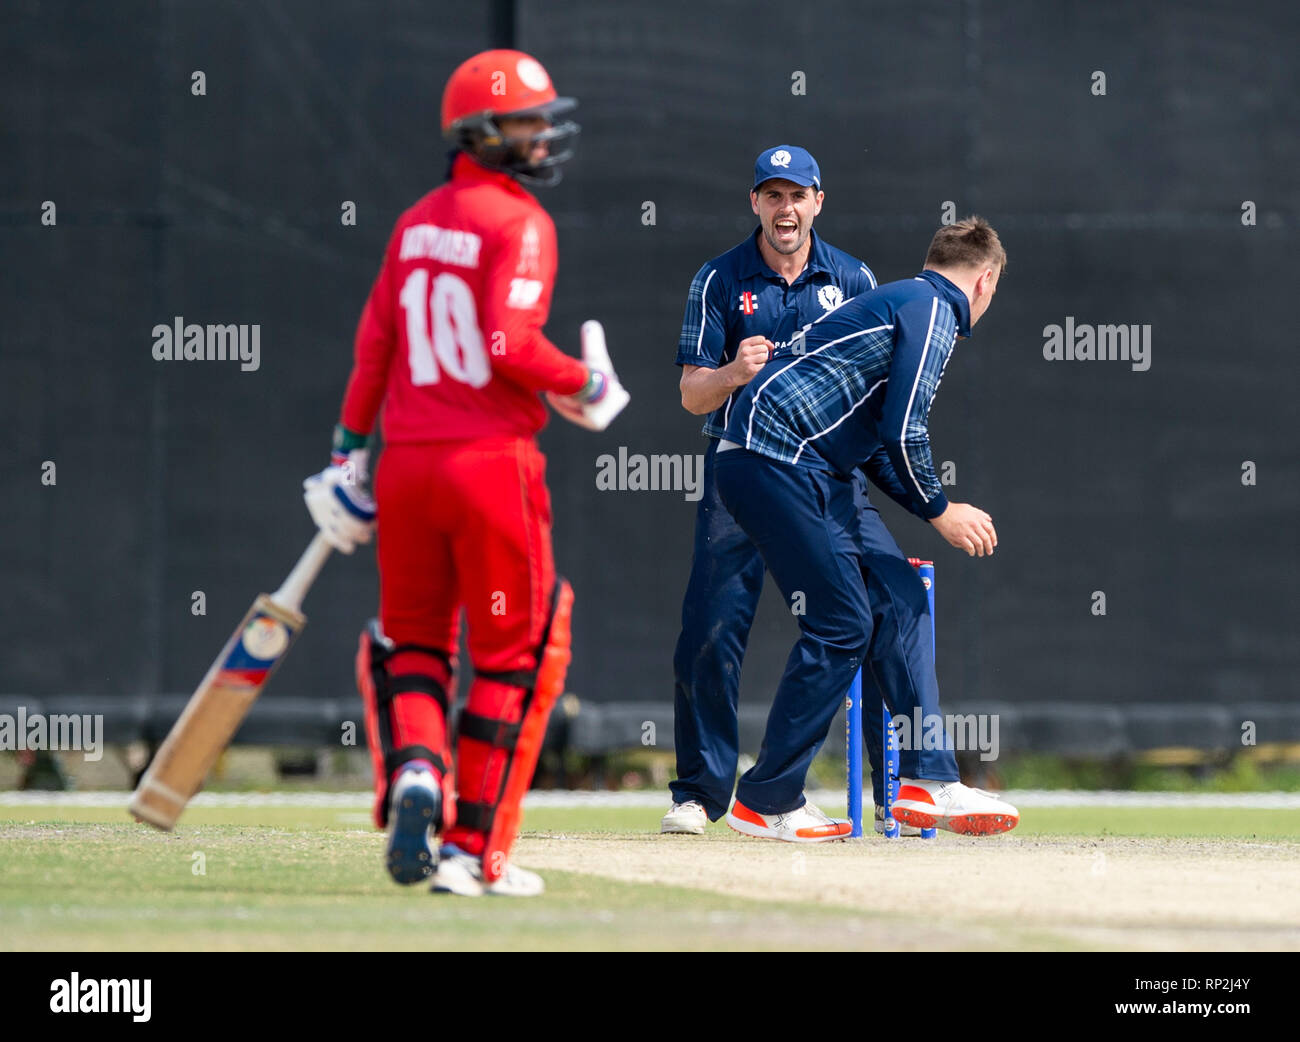 Muscat, Oman. 20th Feb, 2019. Pic shows: Oman's Jatinder Singh is run out for 30 as Oman comprehensively beat Scotland by 93 runs to tie the 3 match 50 over series. Credit: Ian Jacobs/Alamy Live News Stock Photo